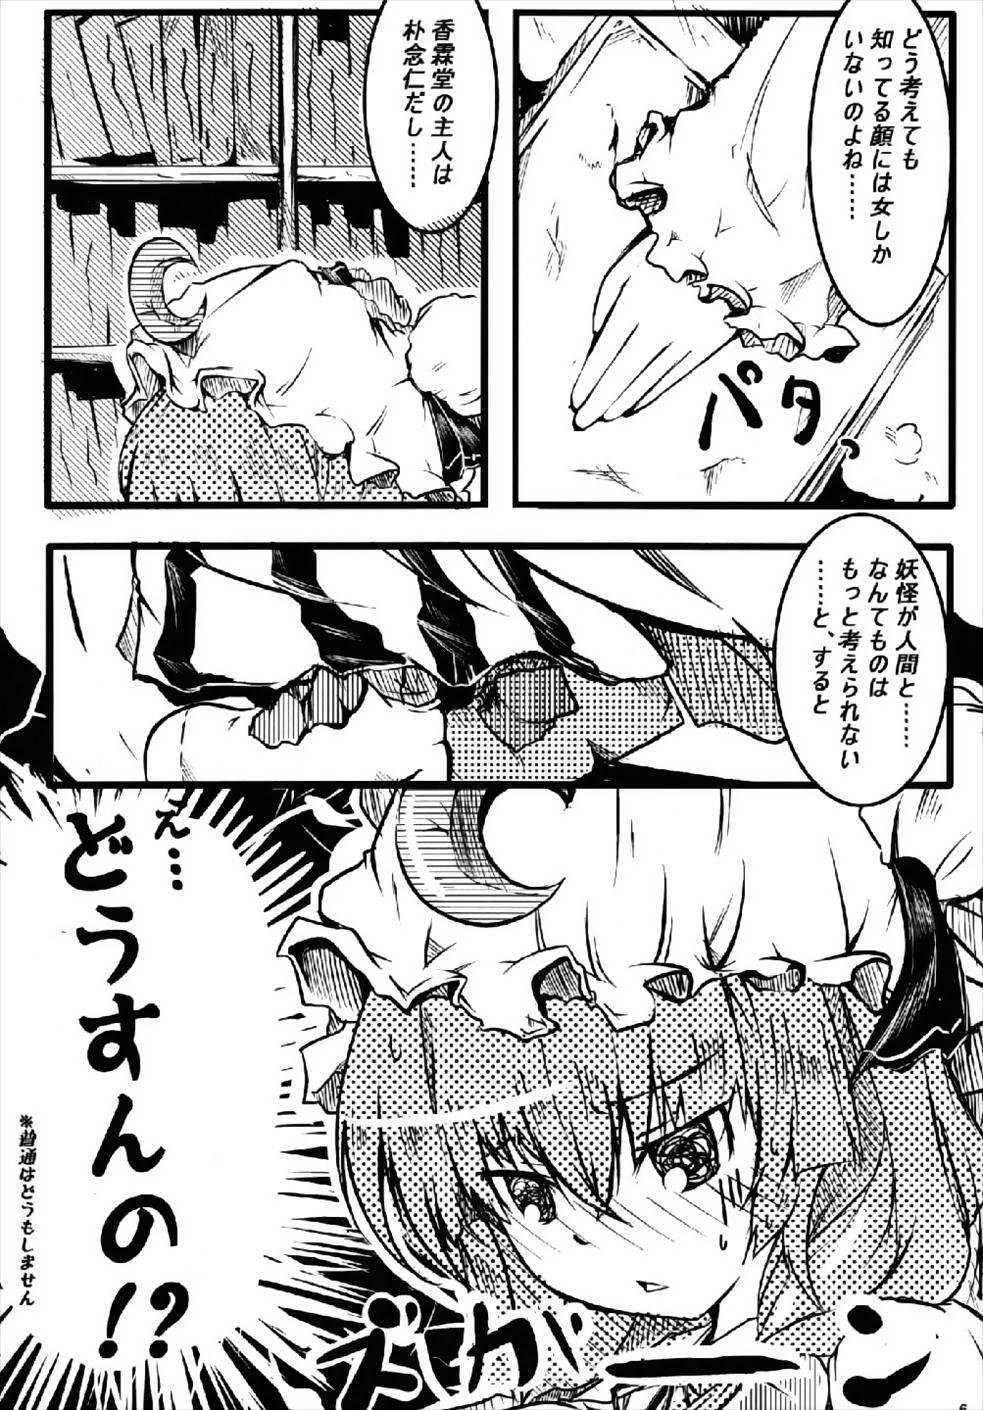 Ass Fetish RemiFlaPatche! - Touhou project Big Booty - Page 5